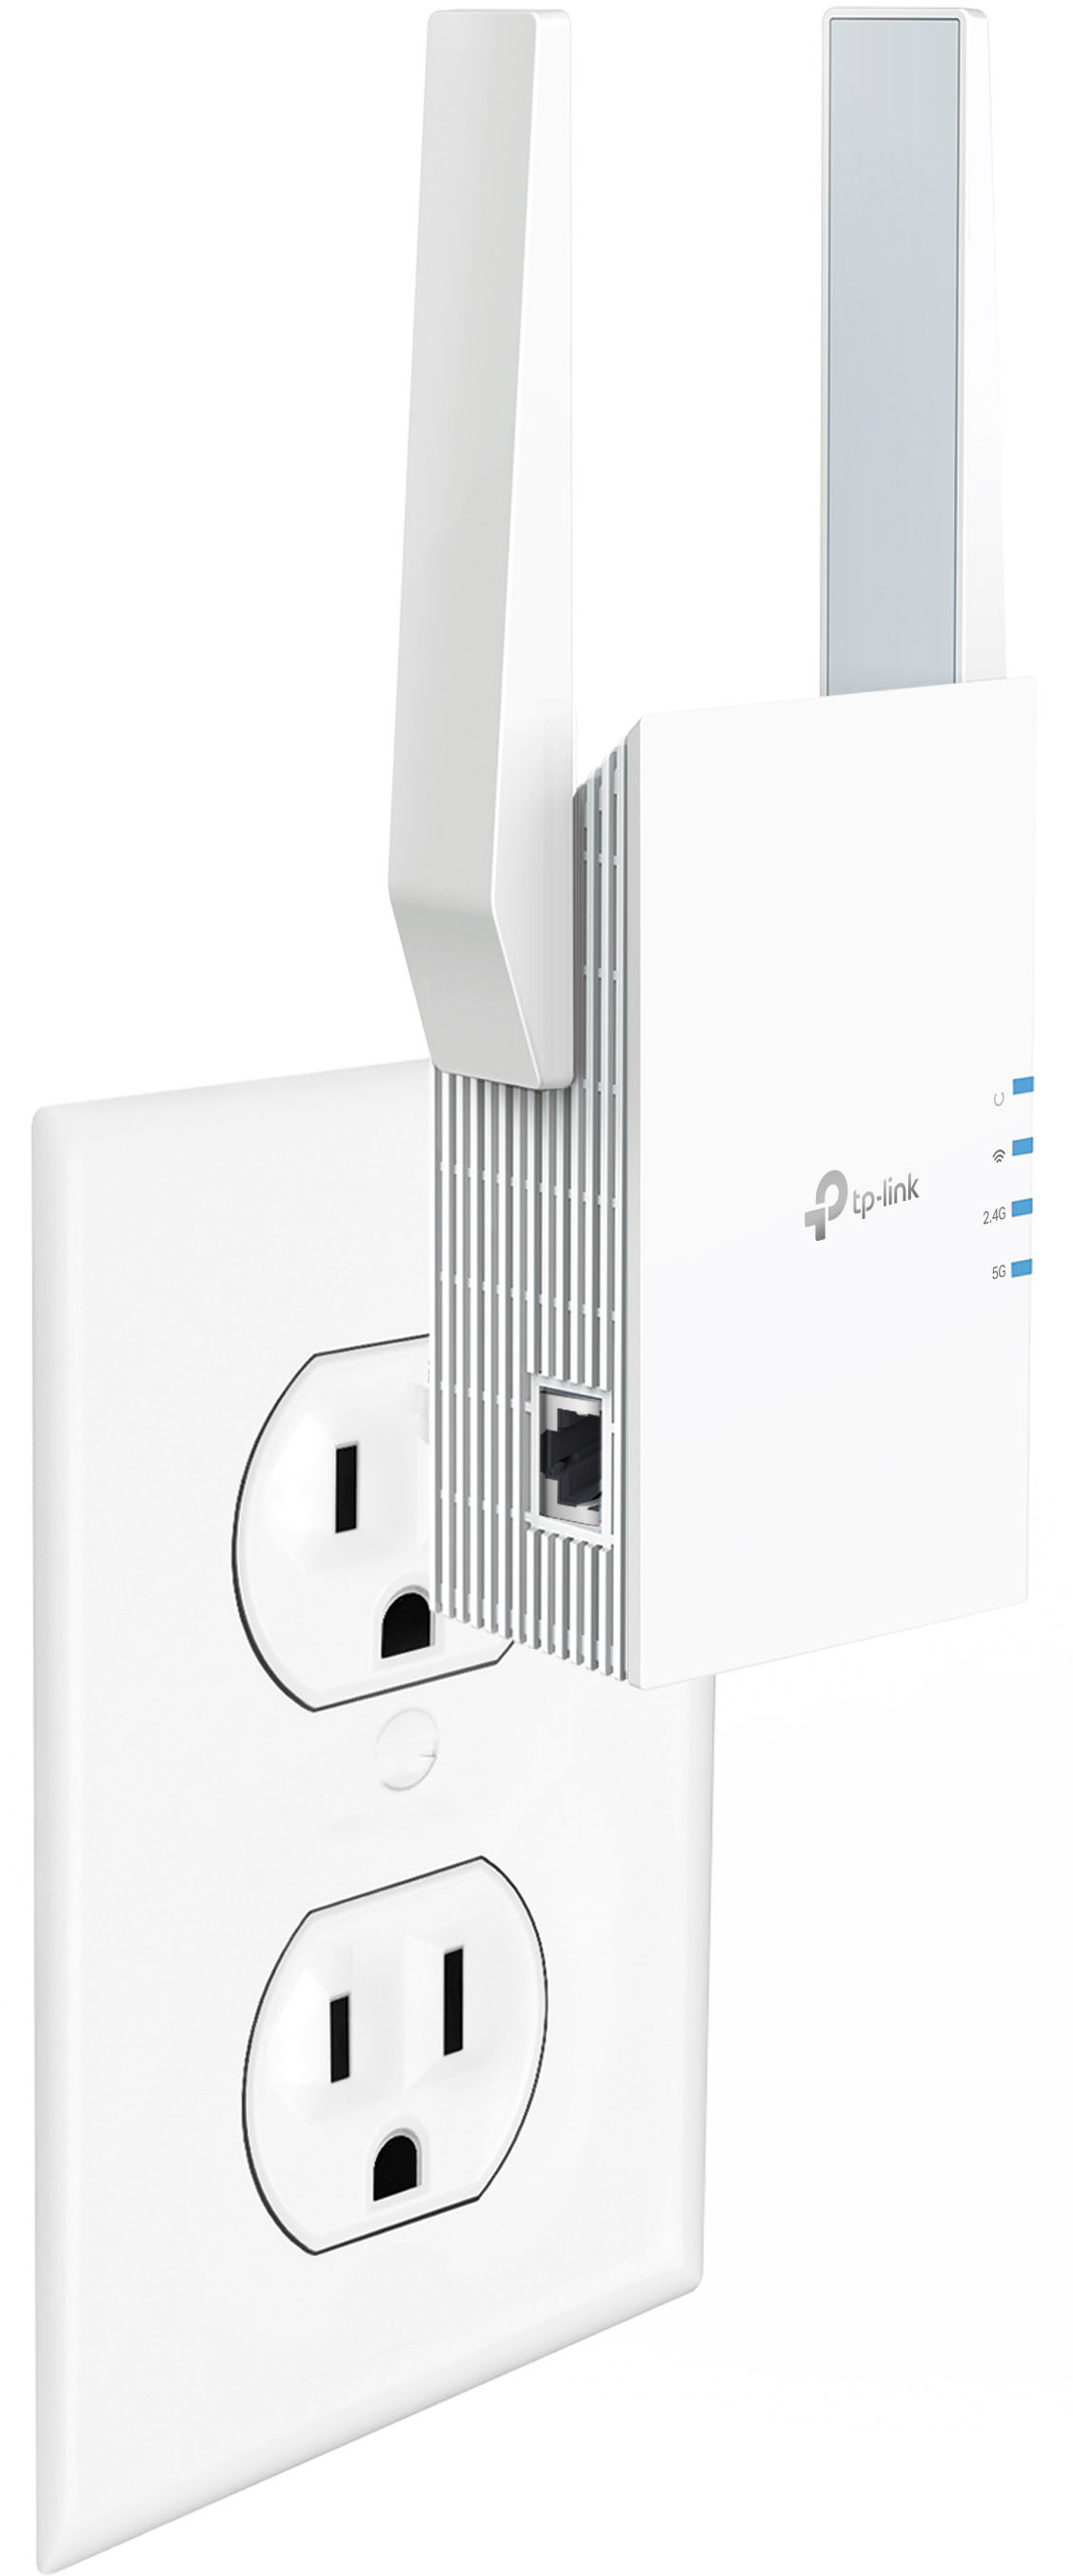 TP-Link AX3000 (RE705X) WiFi Extender Review - Consumer Reports